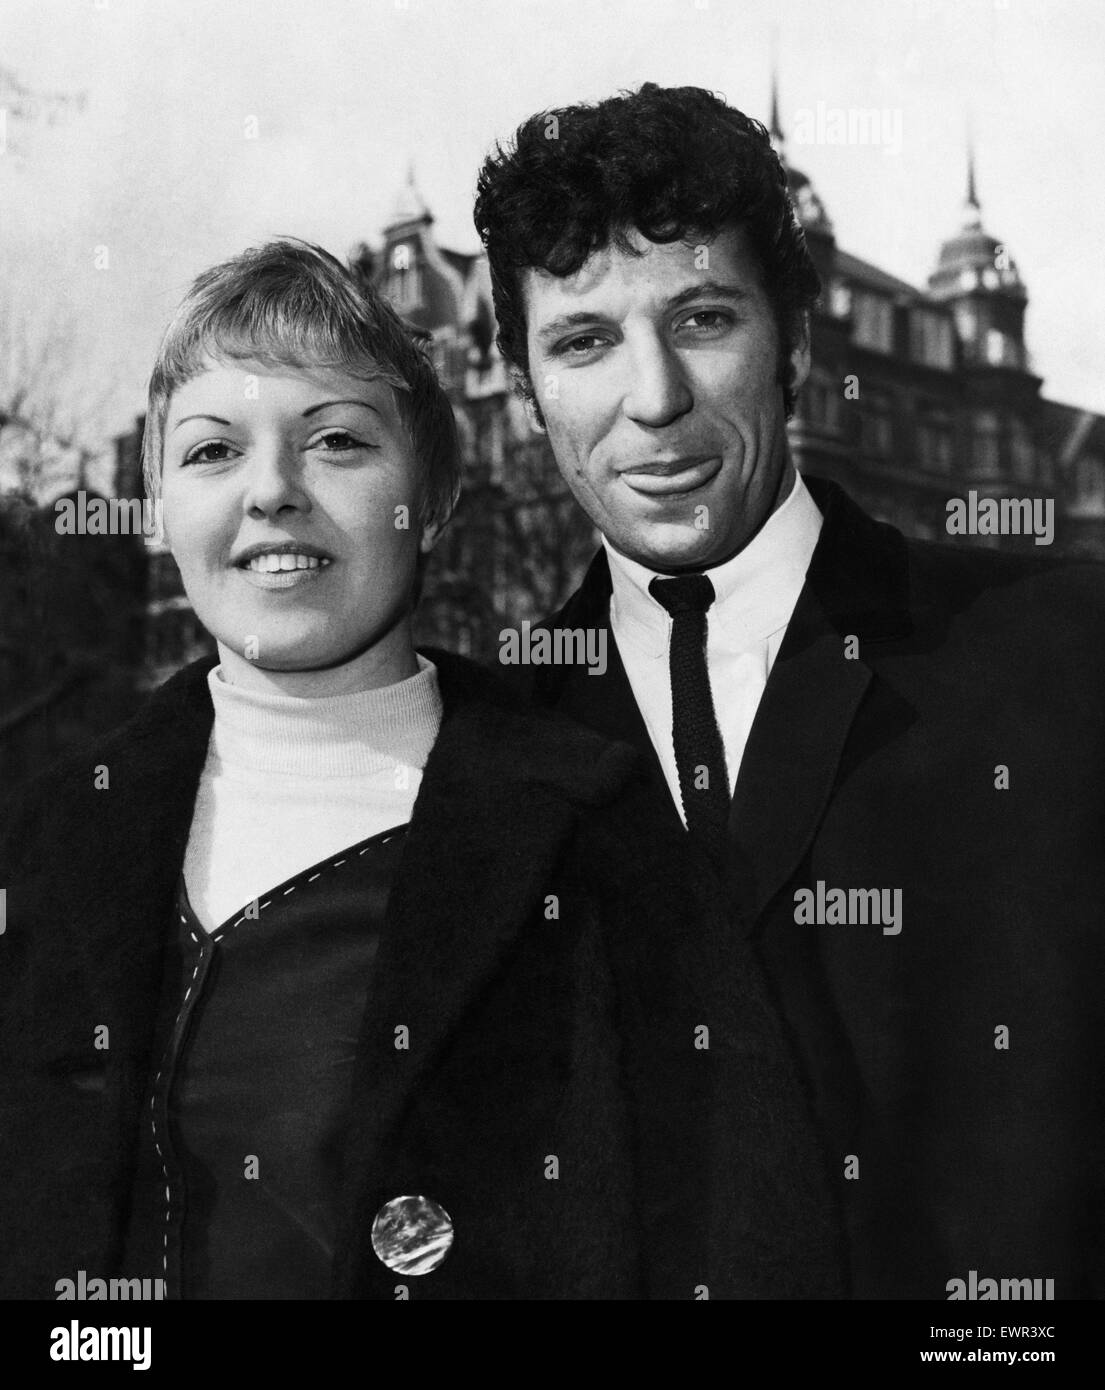 Singer Tom Jones pictured with his wife Linda (Melinda) who went for a stroll around Hanover Square, London, looking at the shops. Jones had just hit the top of the record charts this week with 'It's Not Unusual'. Jones is aged 24. 10th March 1965 Stock Photo